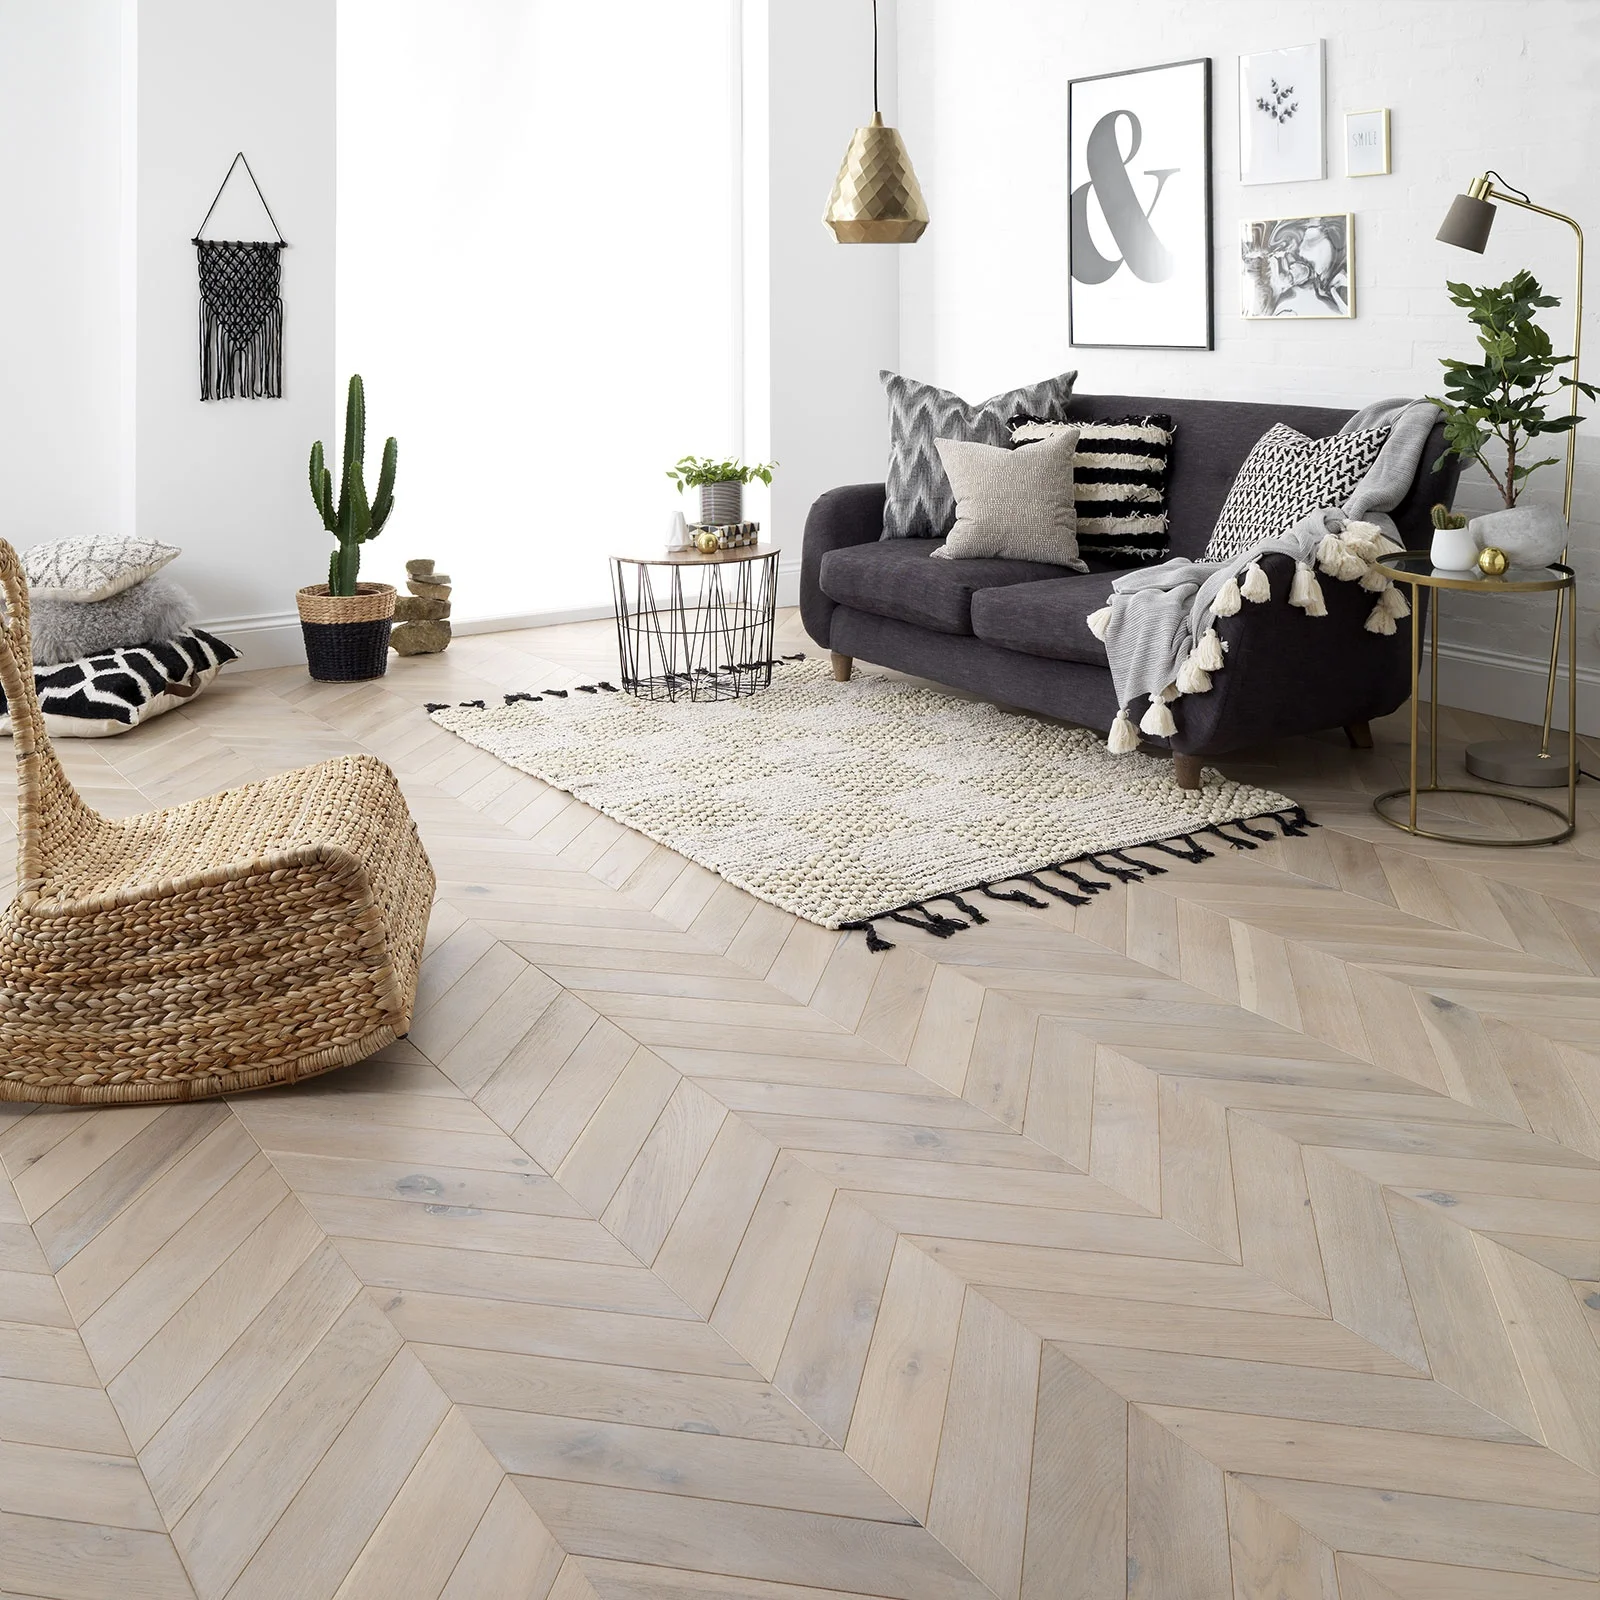 
Hotel / Villa / Apartment Natural Color Chevron Wood Floor French Oak Fishbone Parquetry Panels Unfinished Board Flooring  (62190838373)